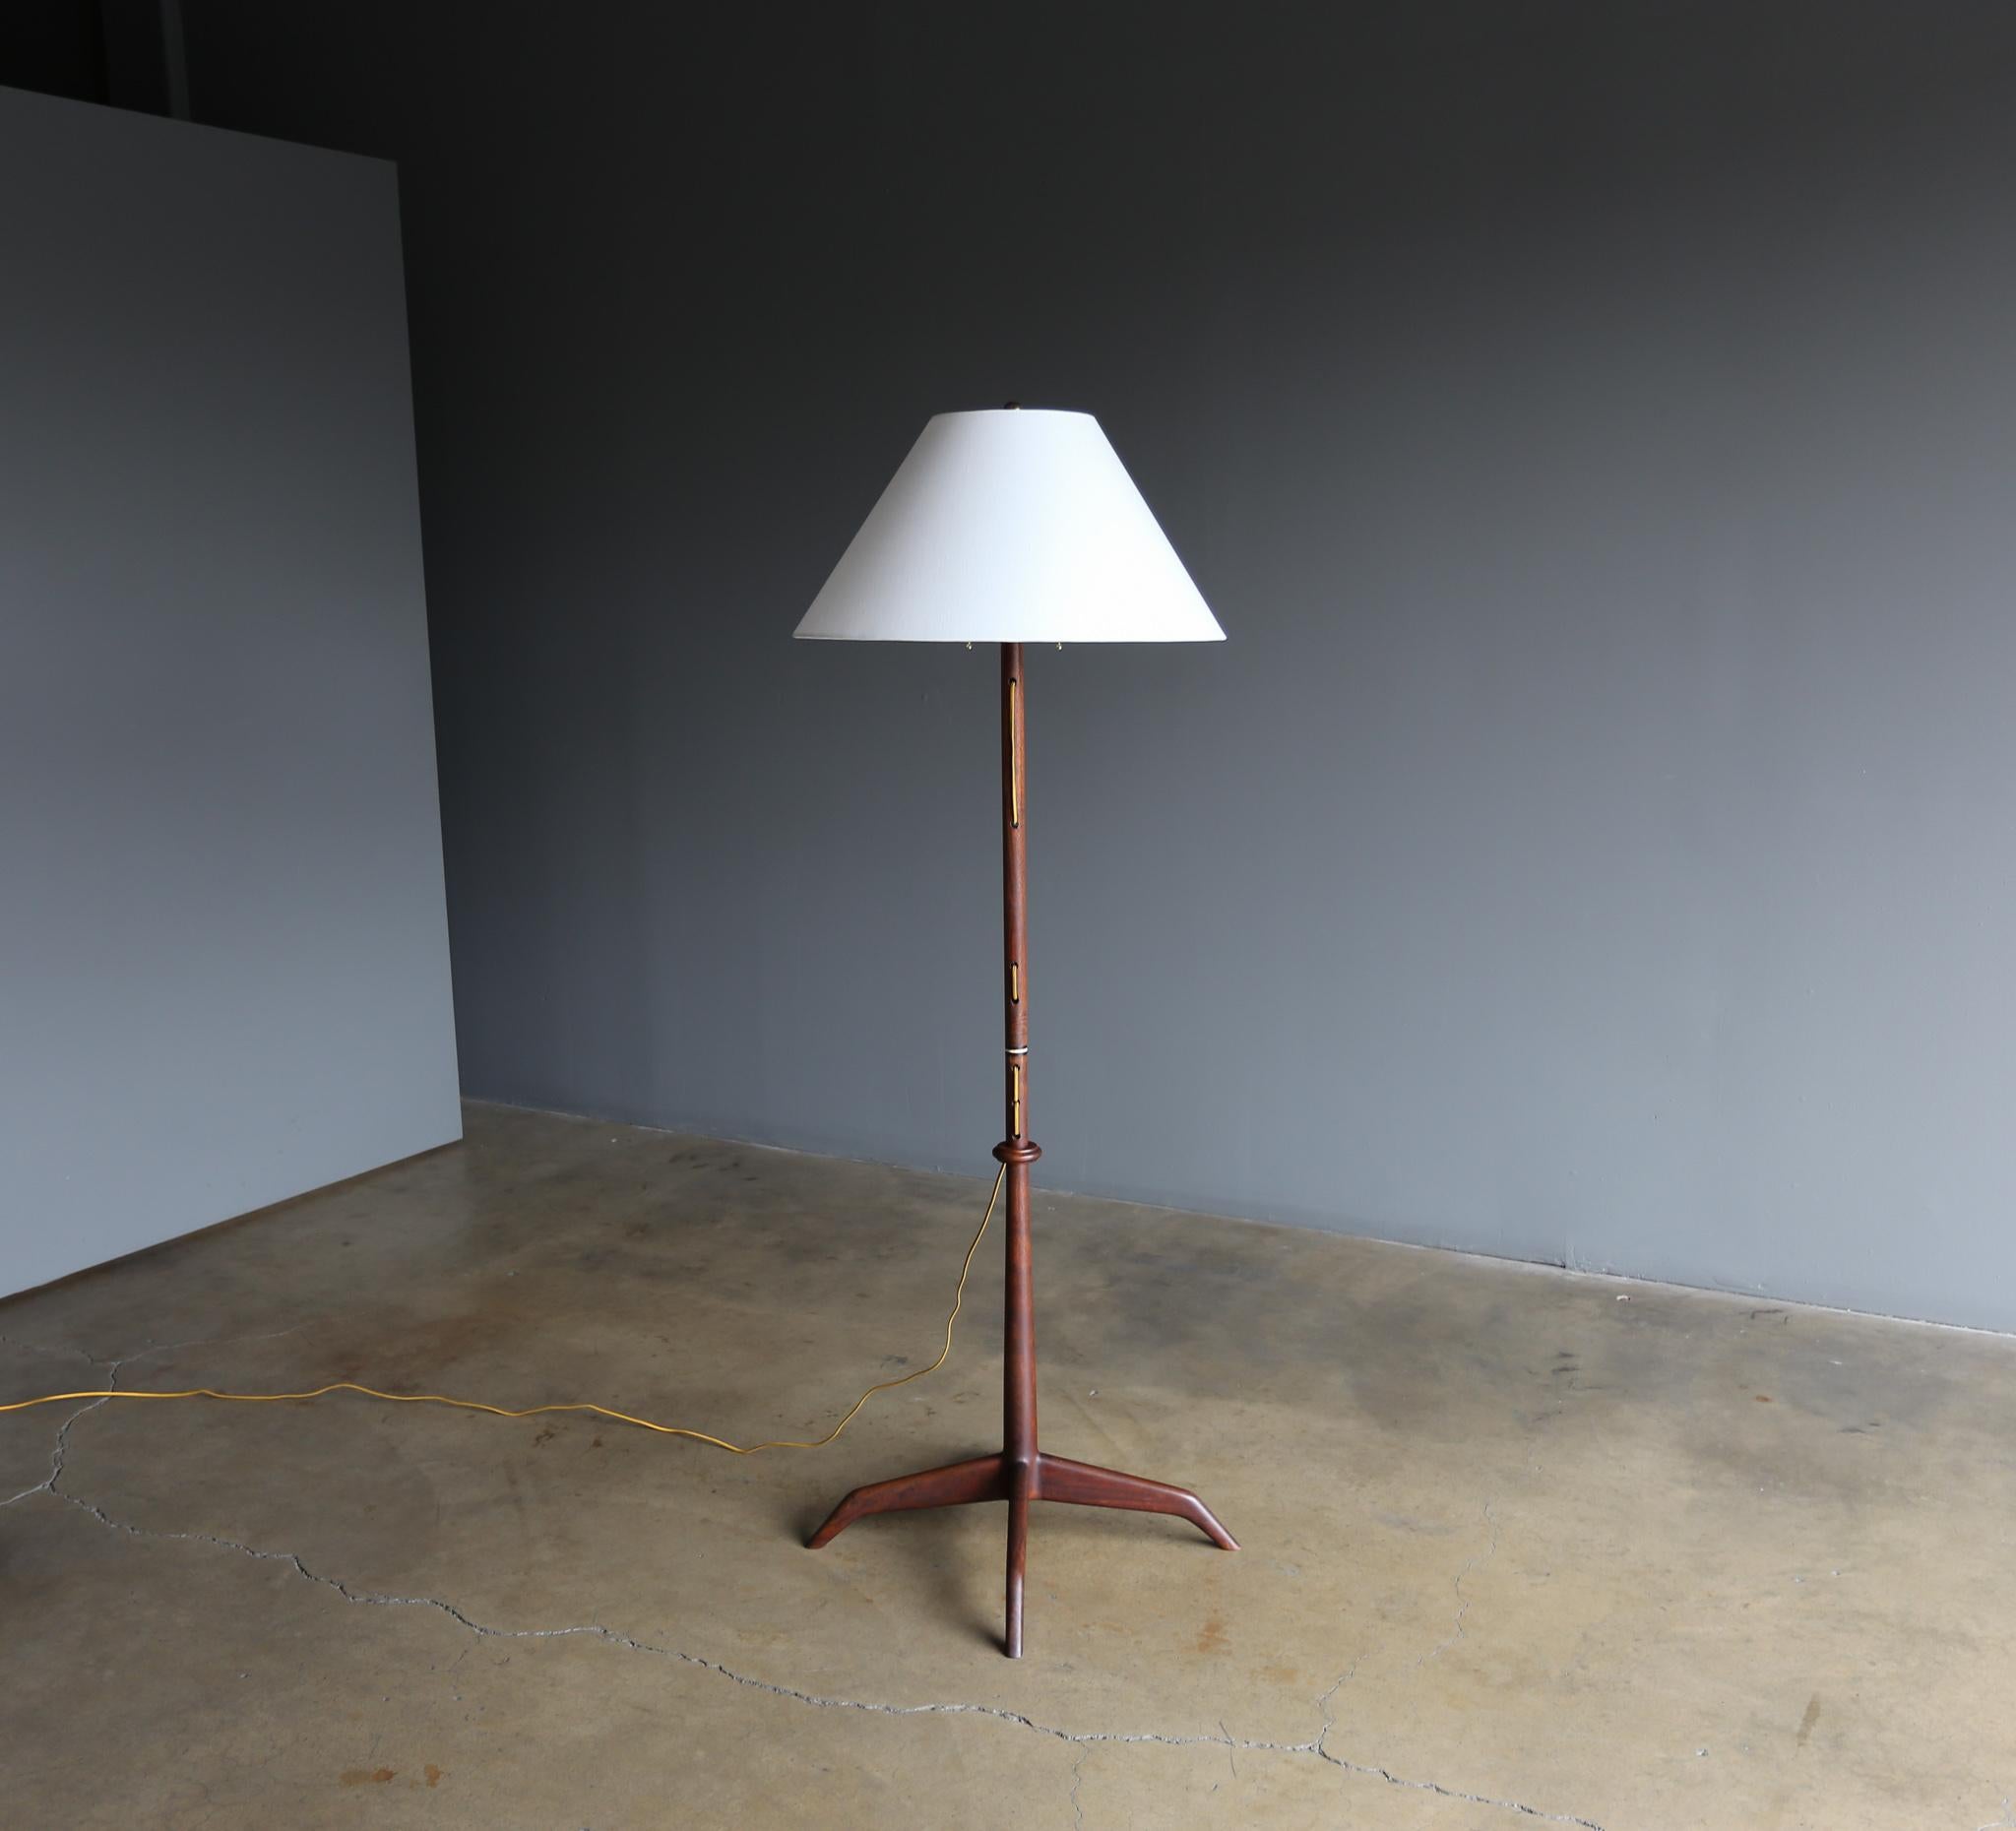 Handcrafted walnut floor lamp by California Craftsman John Nyquist woodworker, circa 1970. This piece is signed.